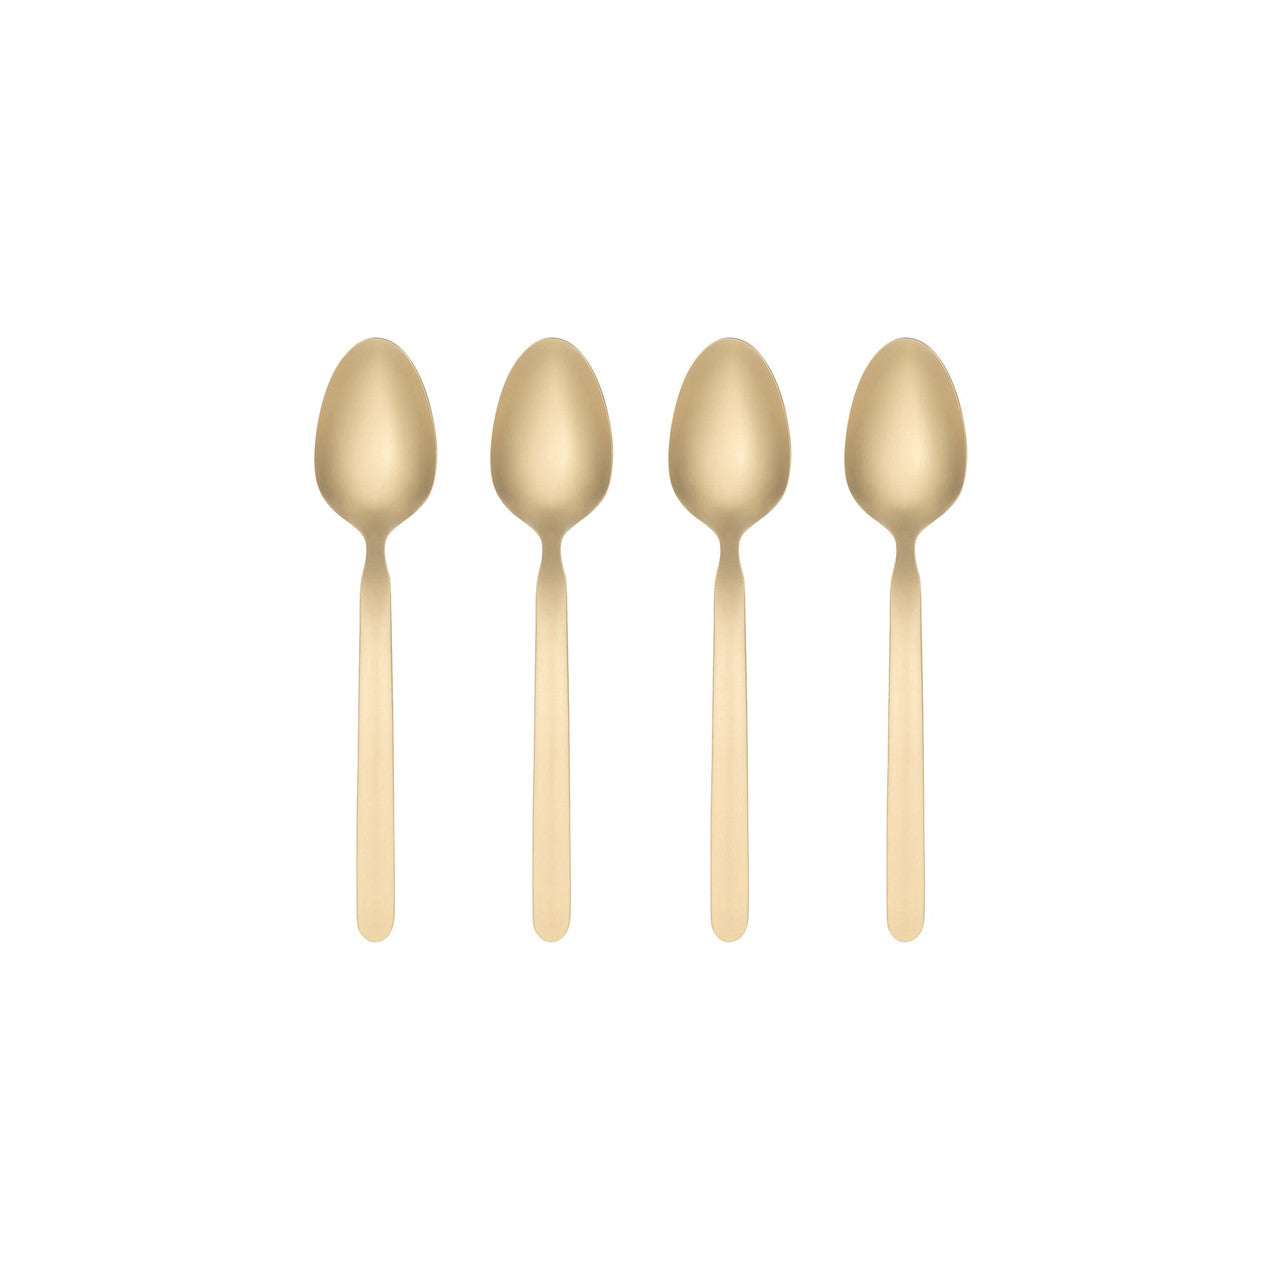 Blomus STELLA Espresso Spoons - Set Of 4 - PVD Coated Stainless Steel